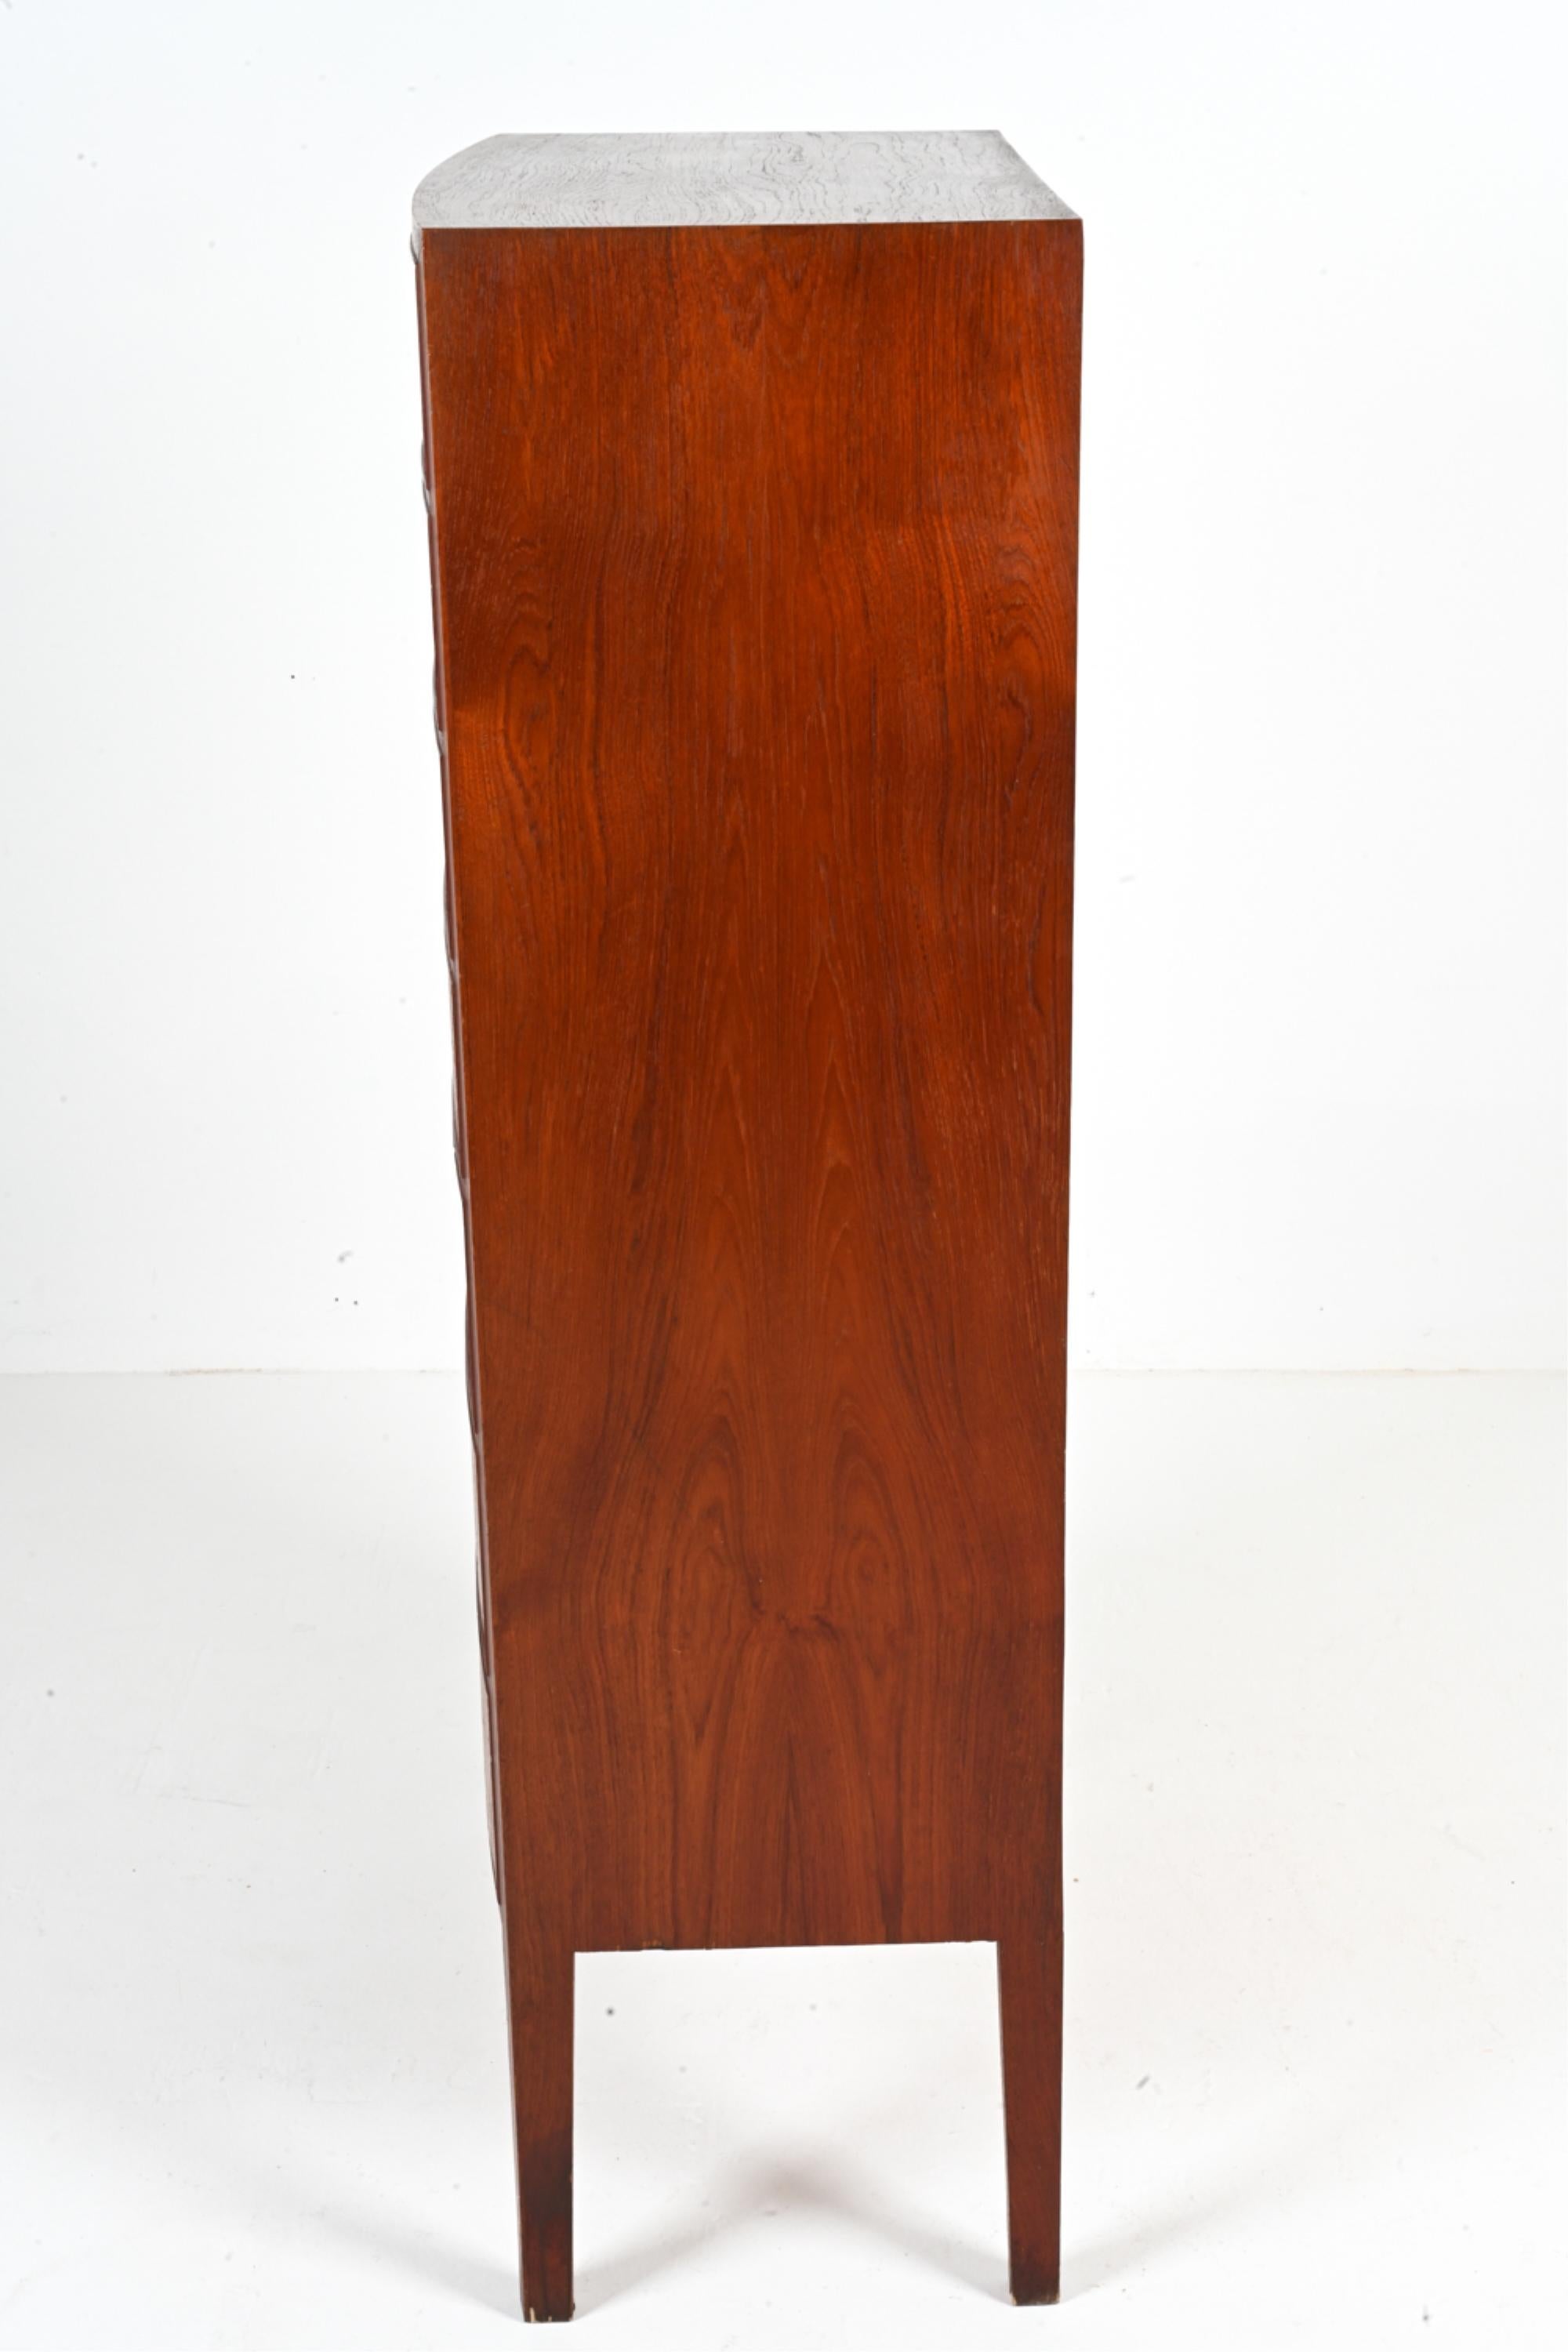 Danish Mid-Century Teak Bow-Front Tallboy Chest Attributed to Ole Wanscher For Sale 2